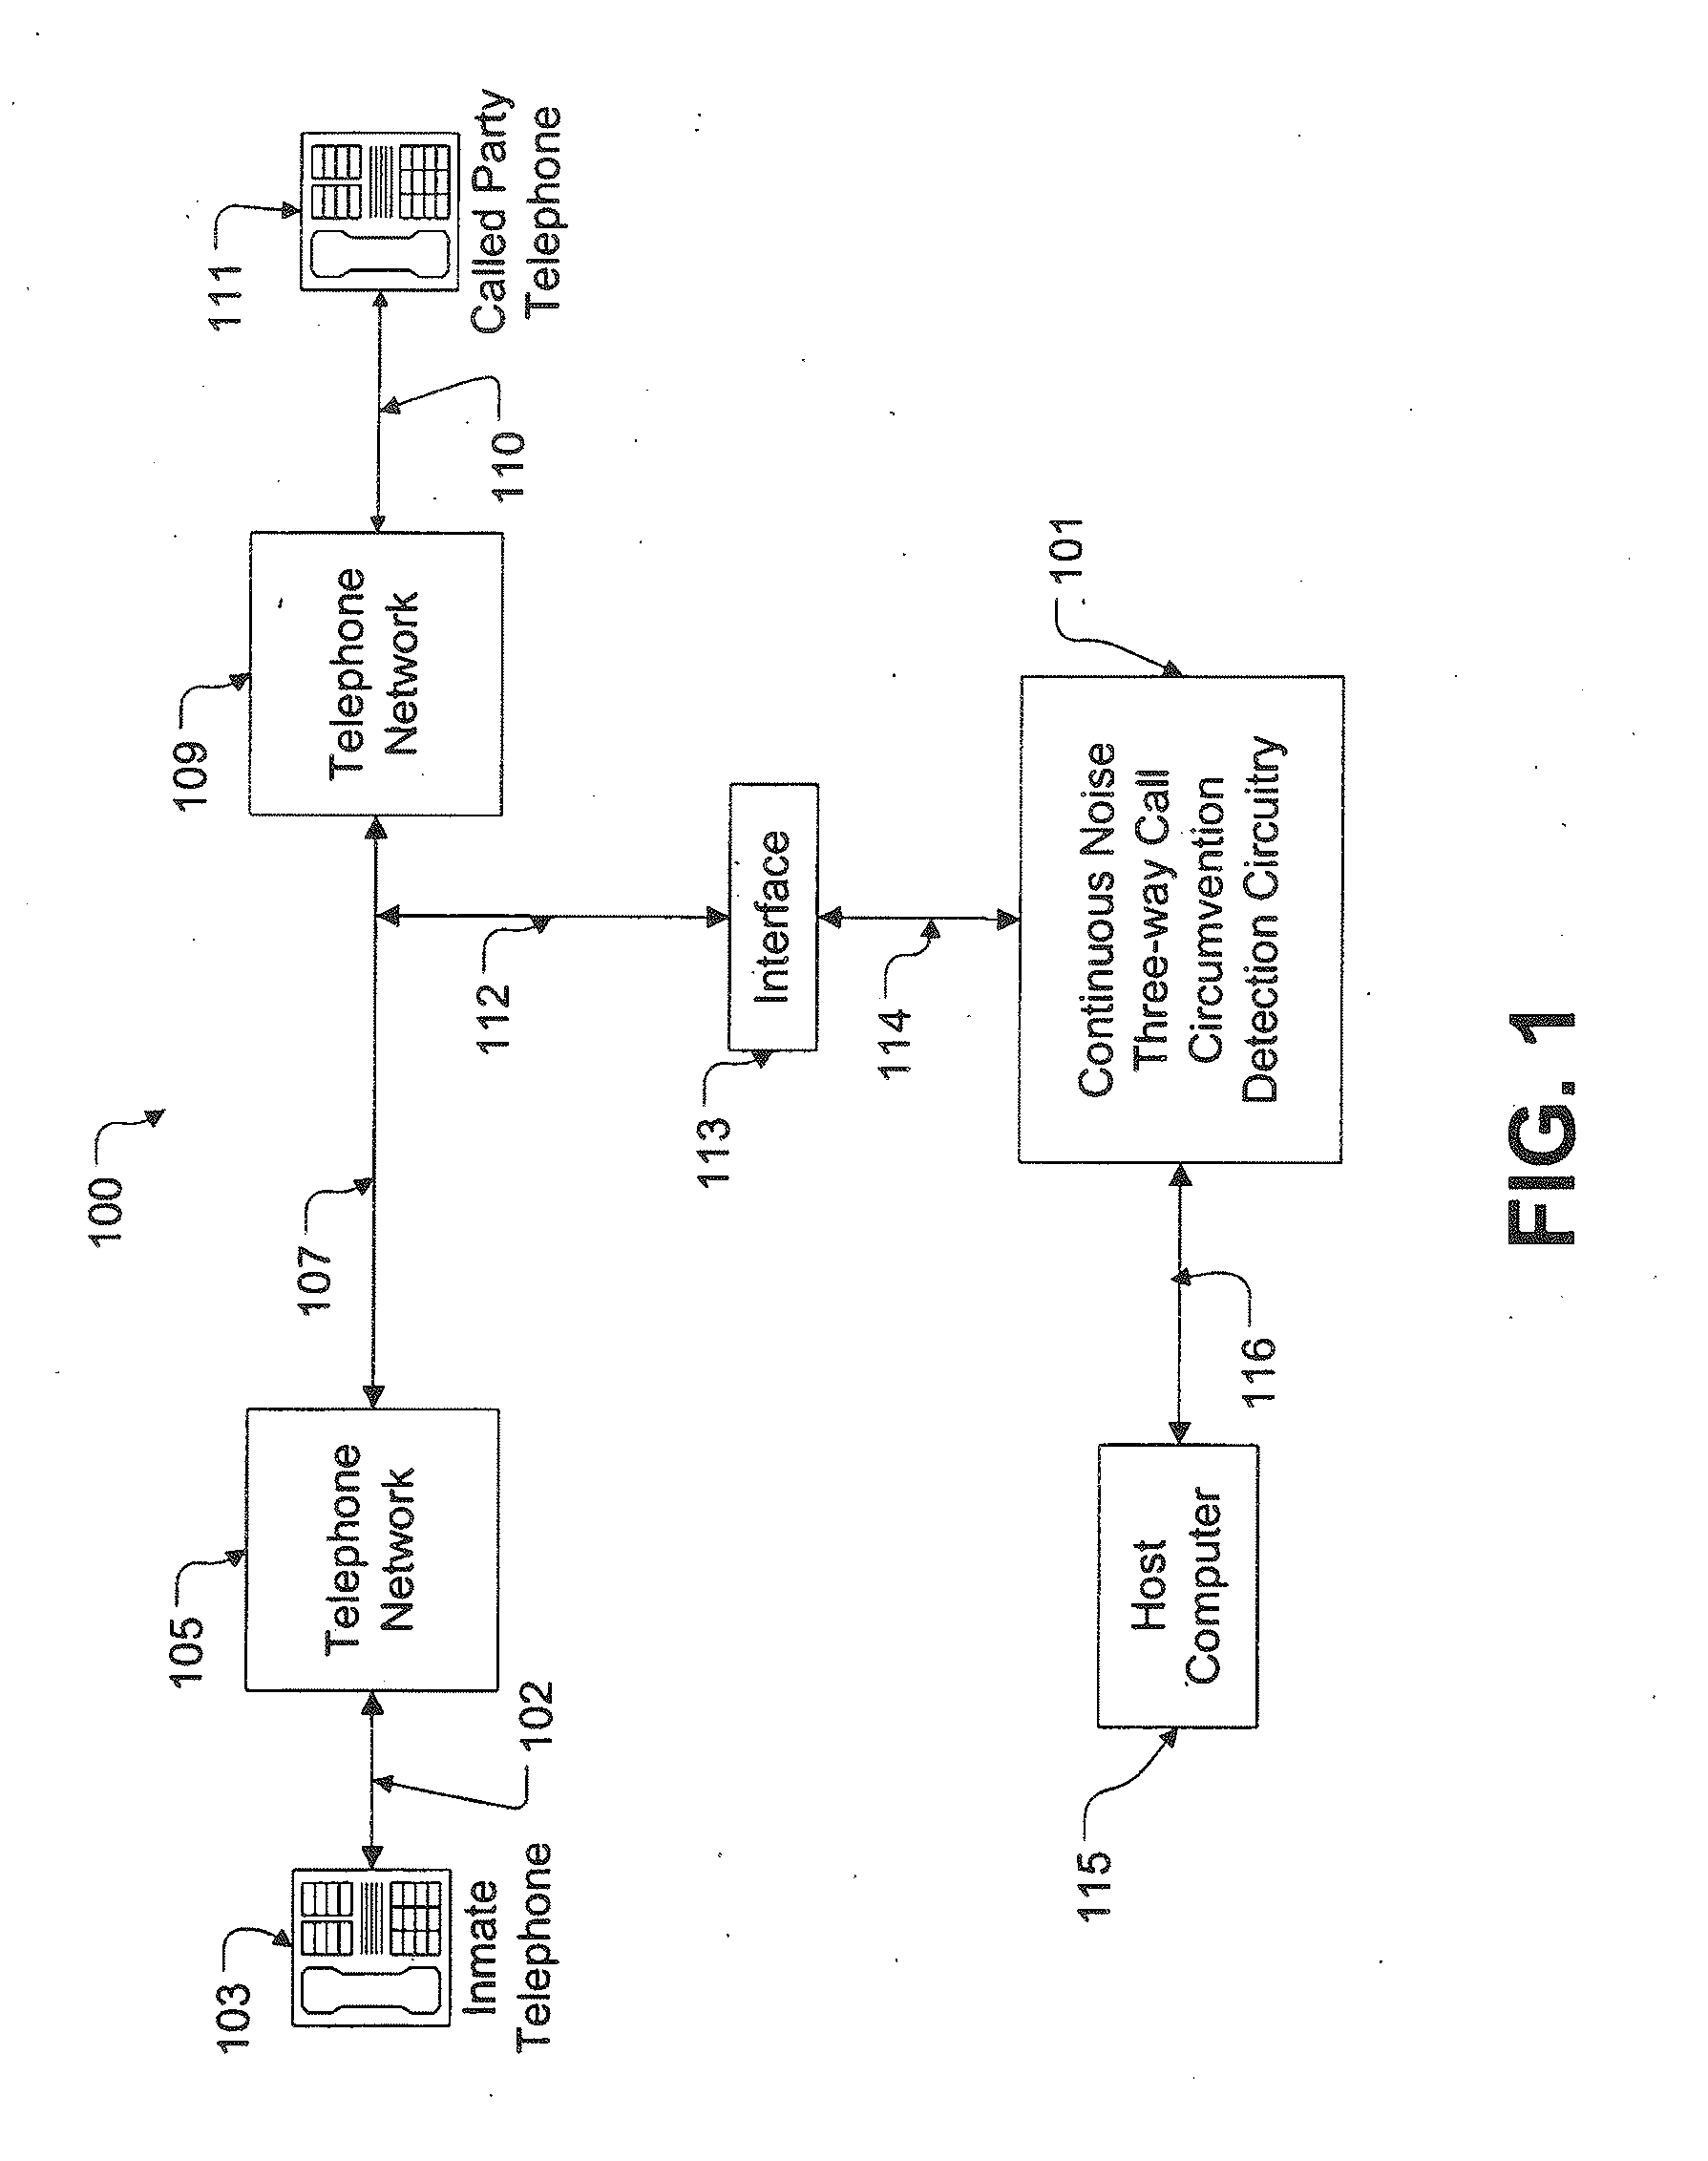 System and Method for Detecting Three-Way Call Circumvention Attempts